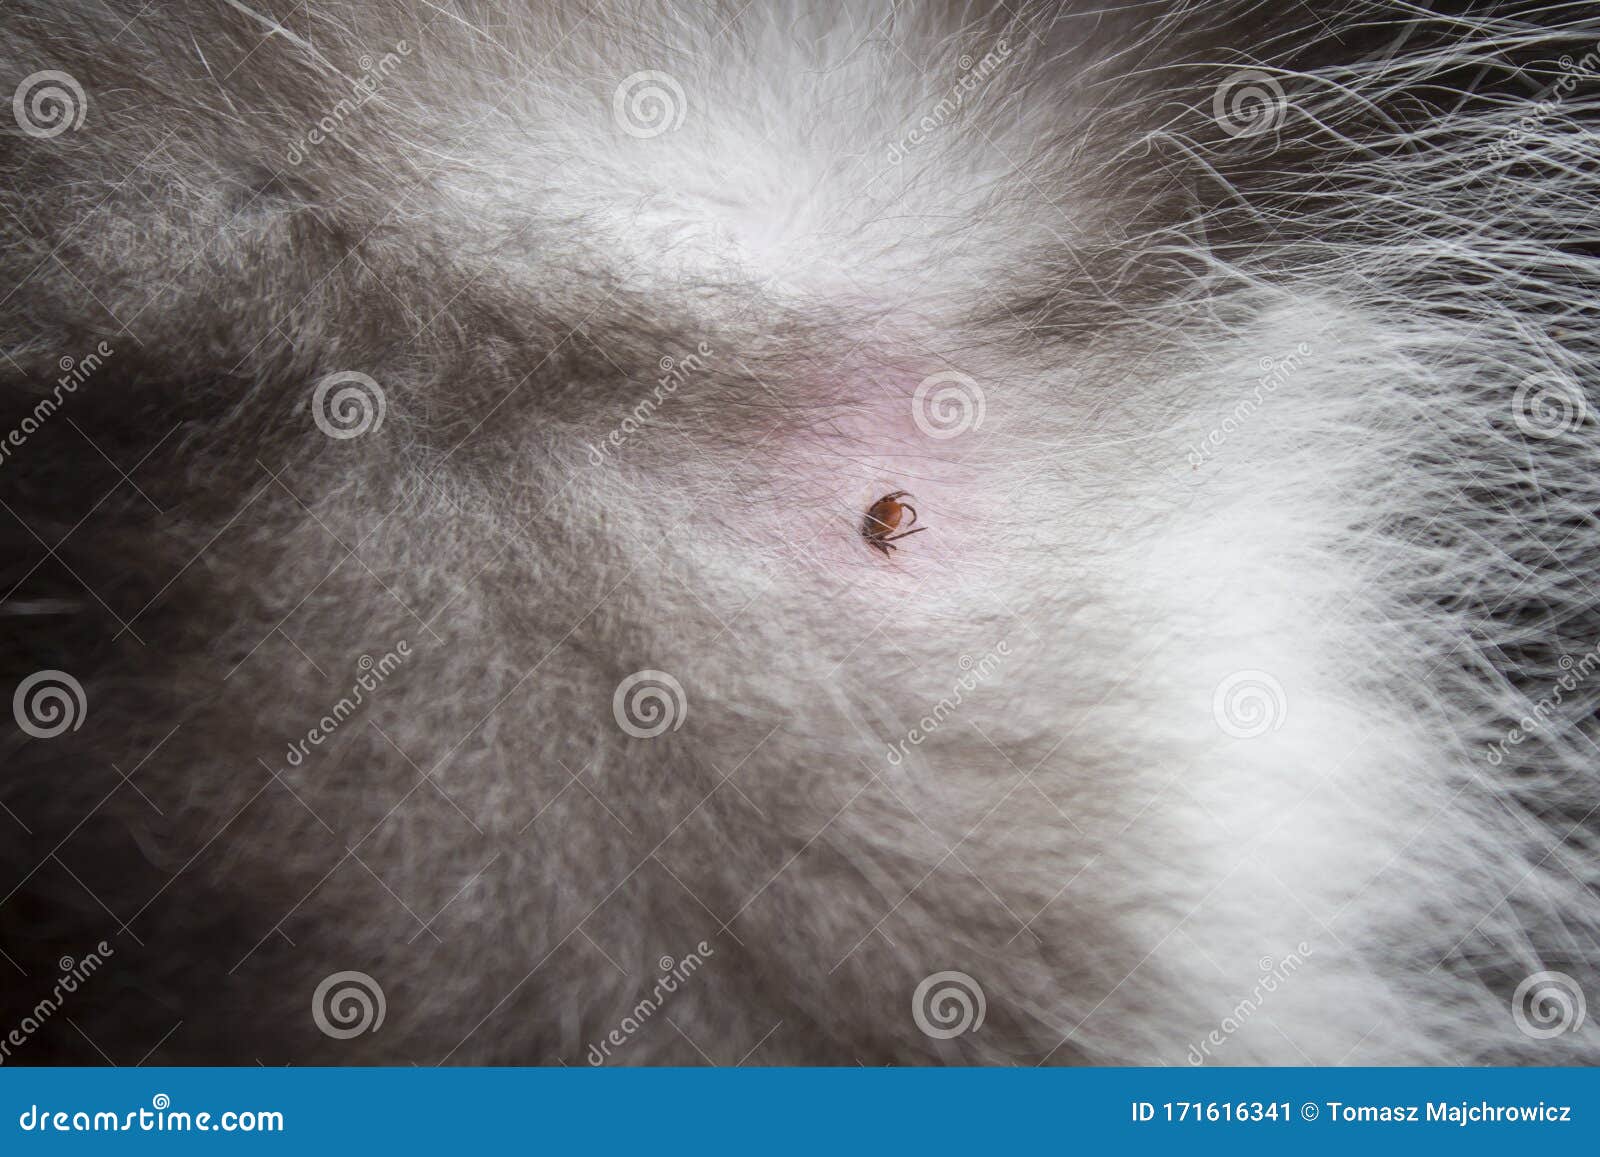 A Brown Tick Bitten Into The Animal`s Skin. Cat`s Skin And Fur. A Small